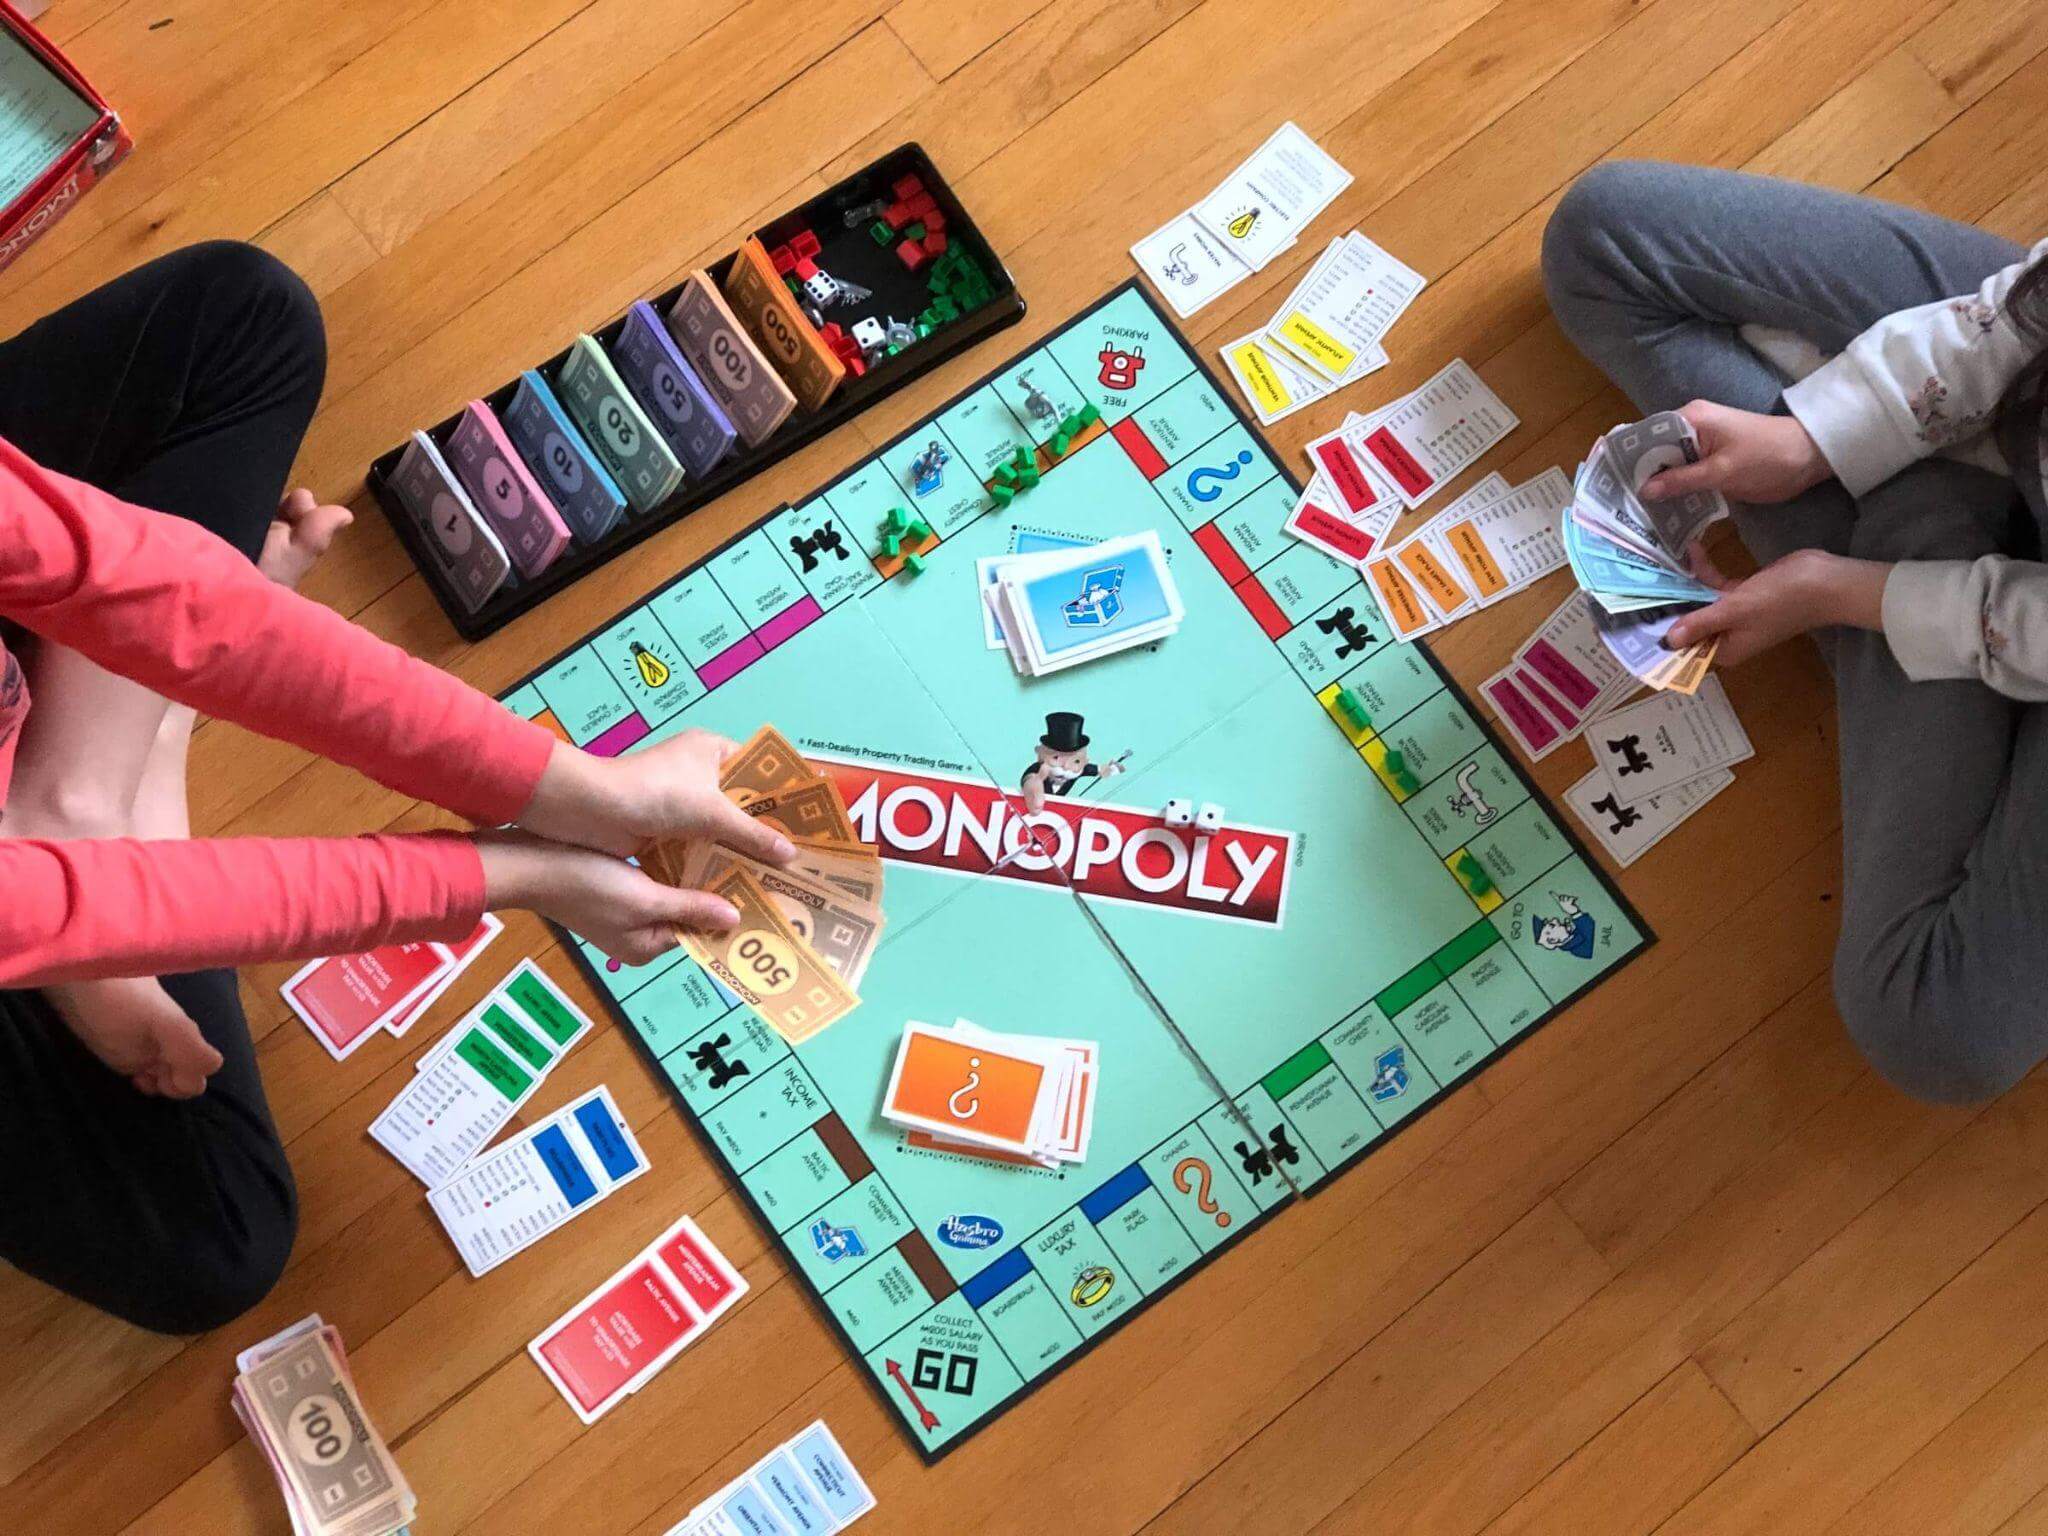 Monopoly is not a good game. It is a game that exposes man at his worst. That is why Monopoly is popular...